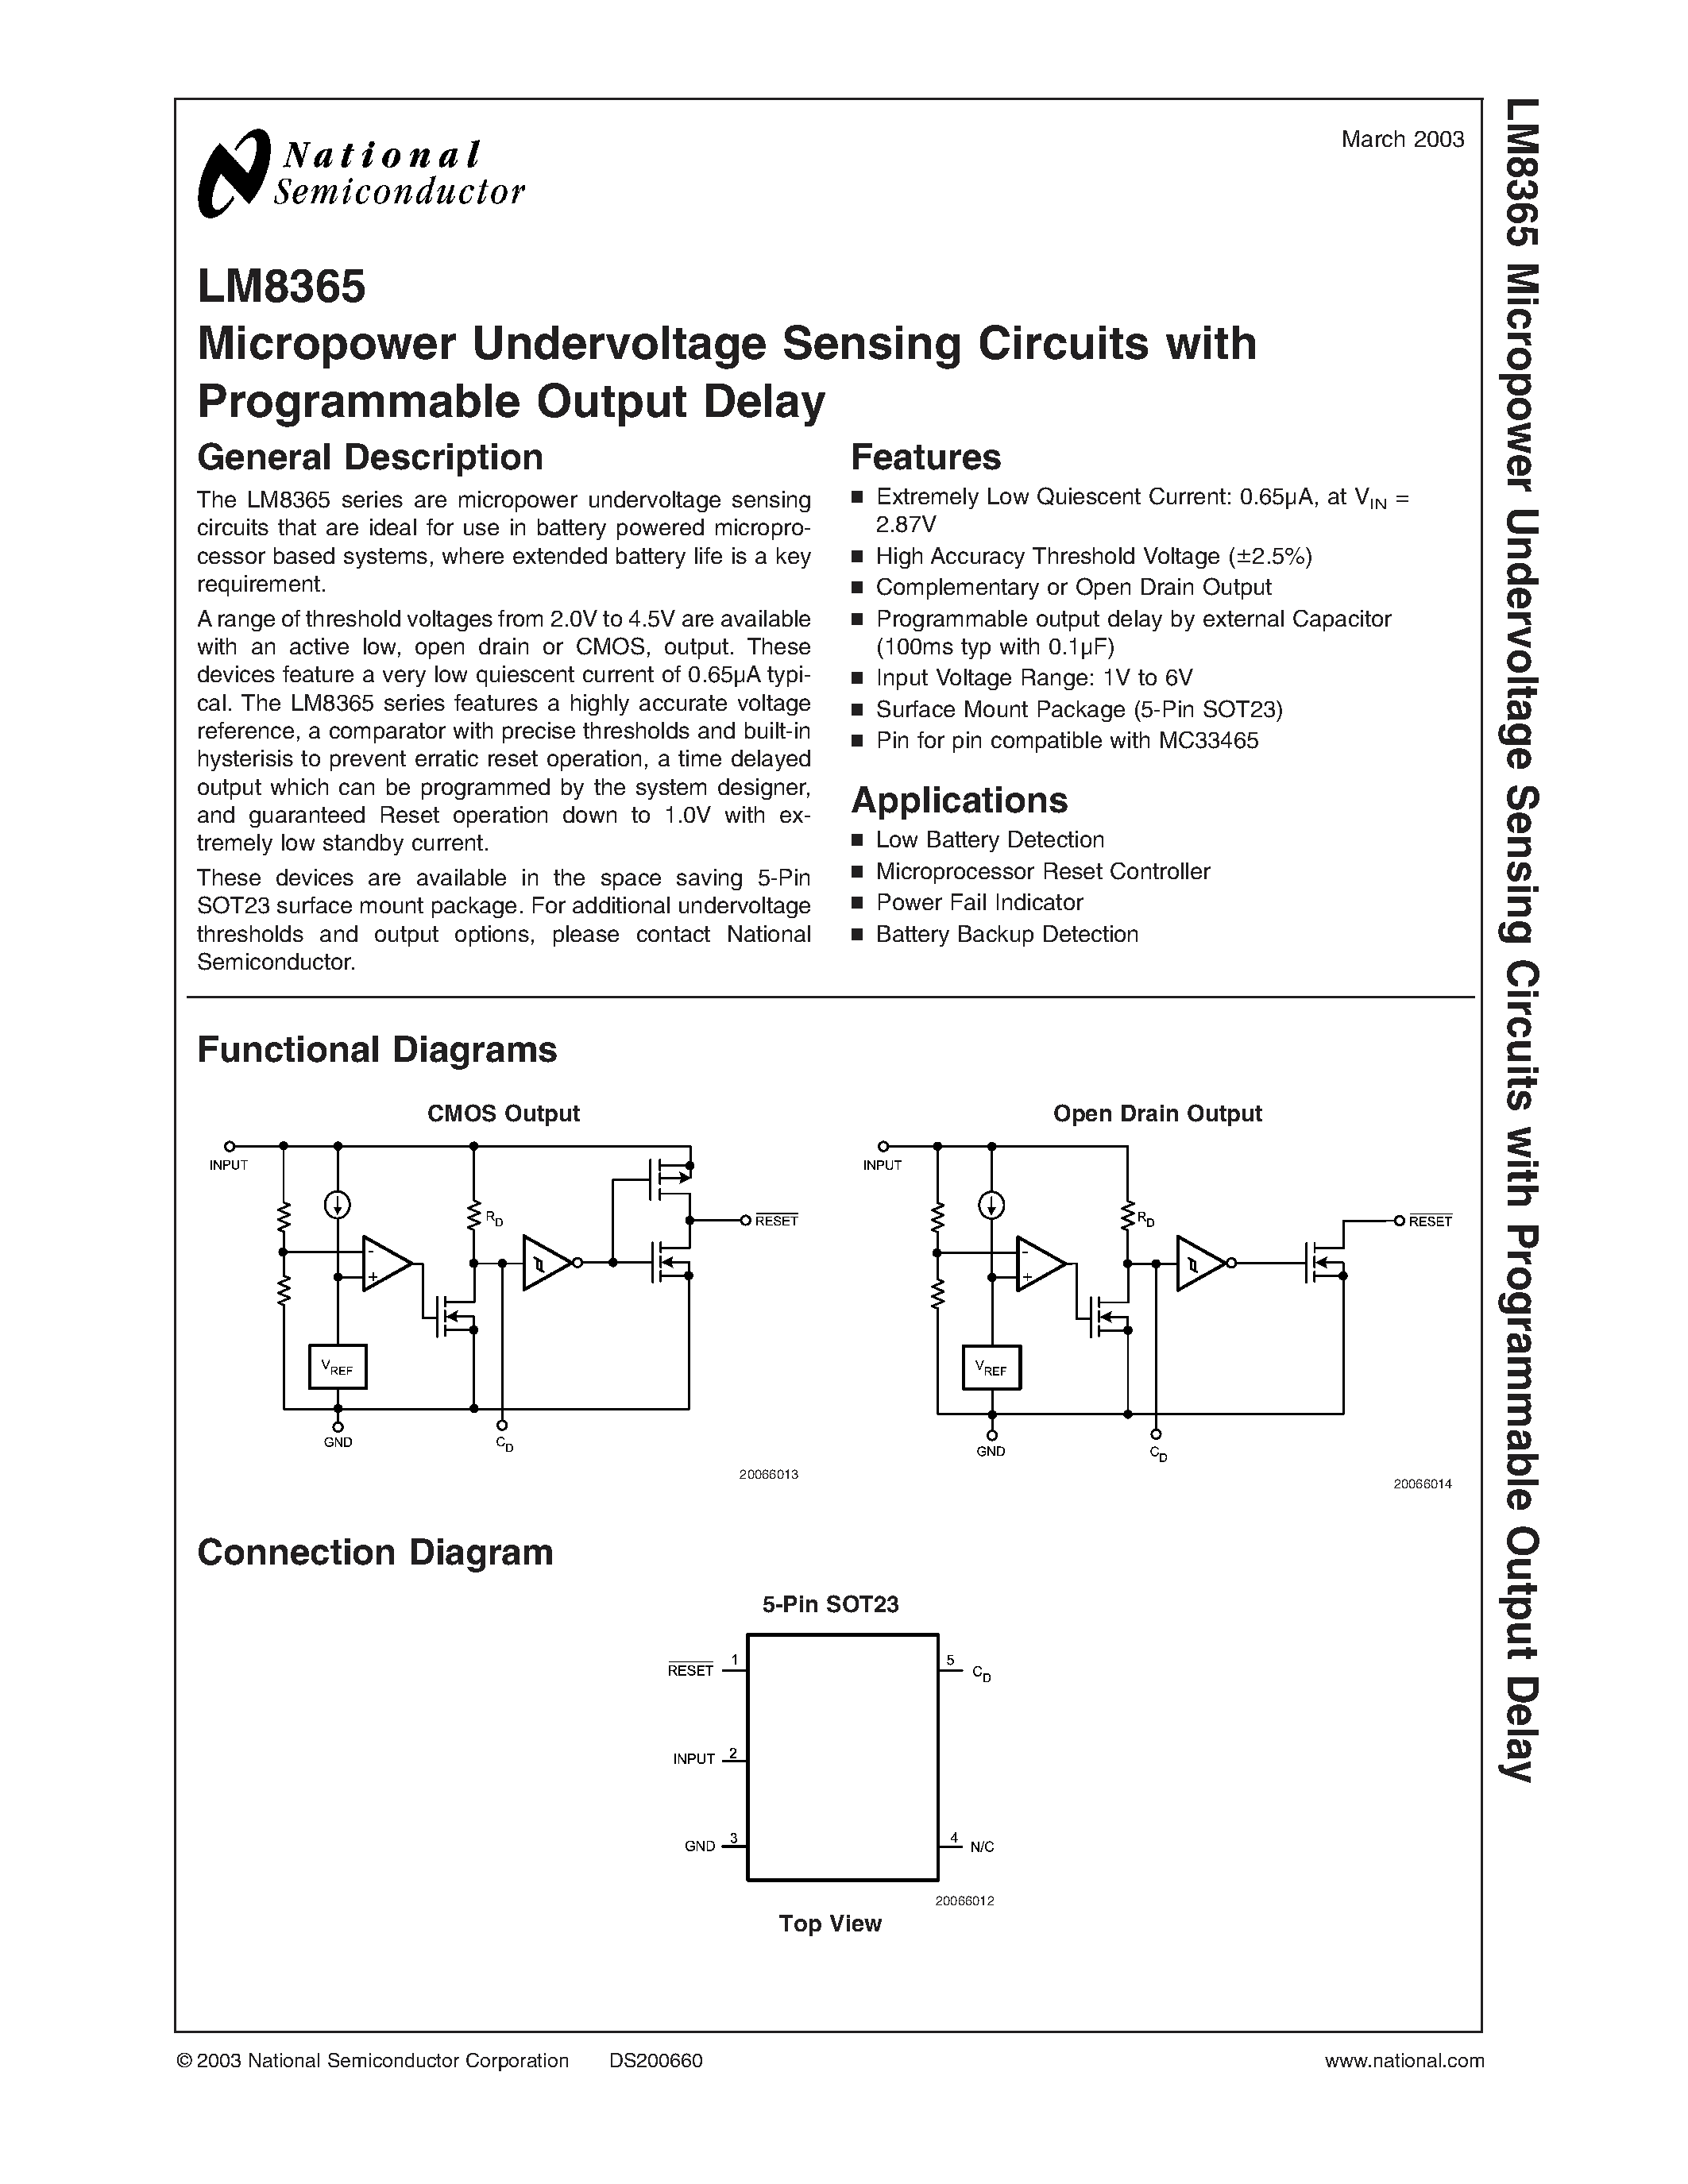 Datasheet LM8365 - Micropower Undervoltage Sensing Circuits with Programmable Output Delay page 1